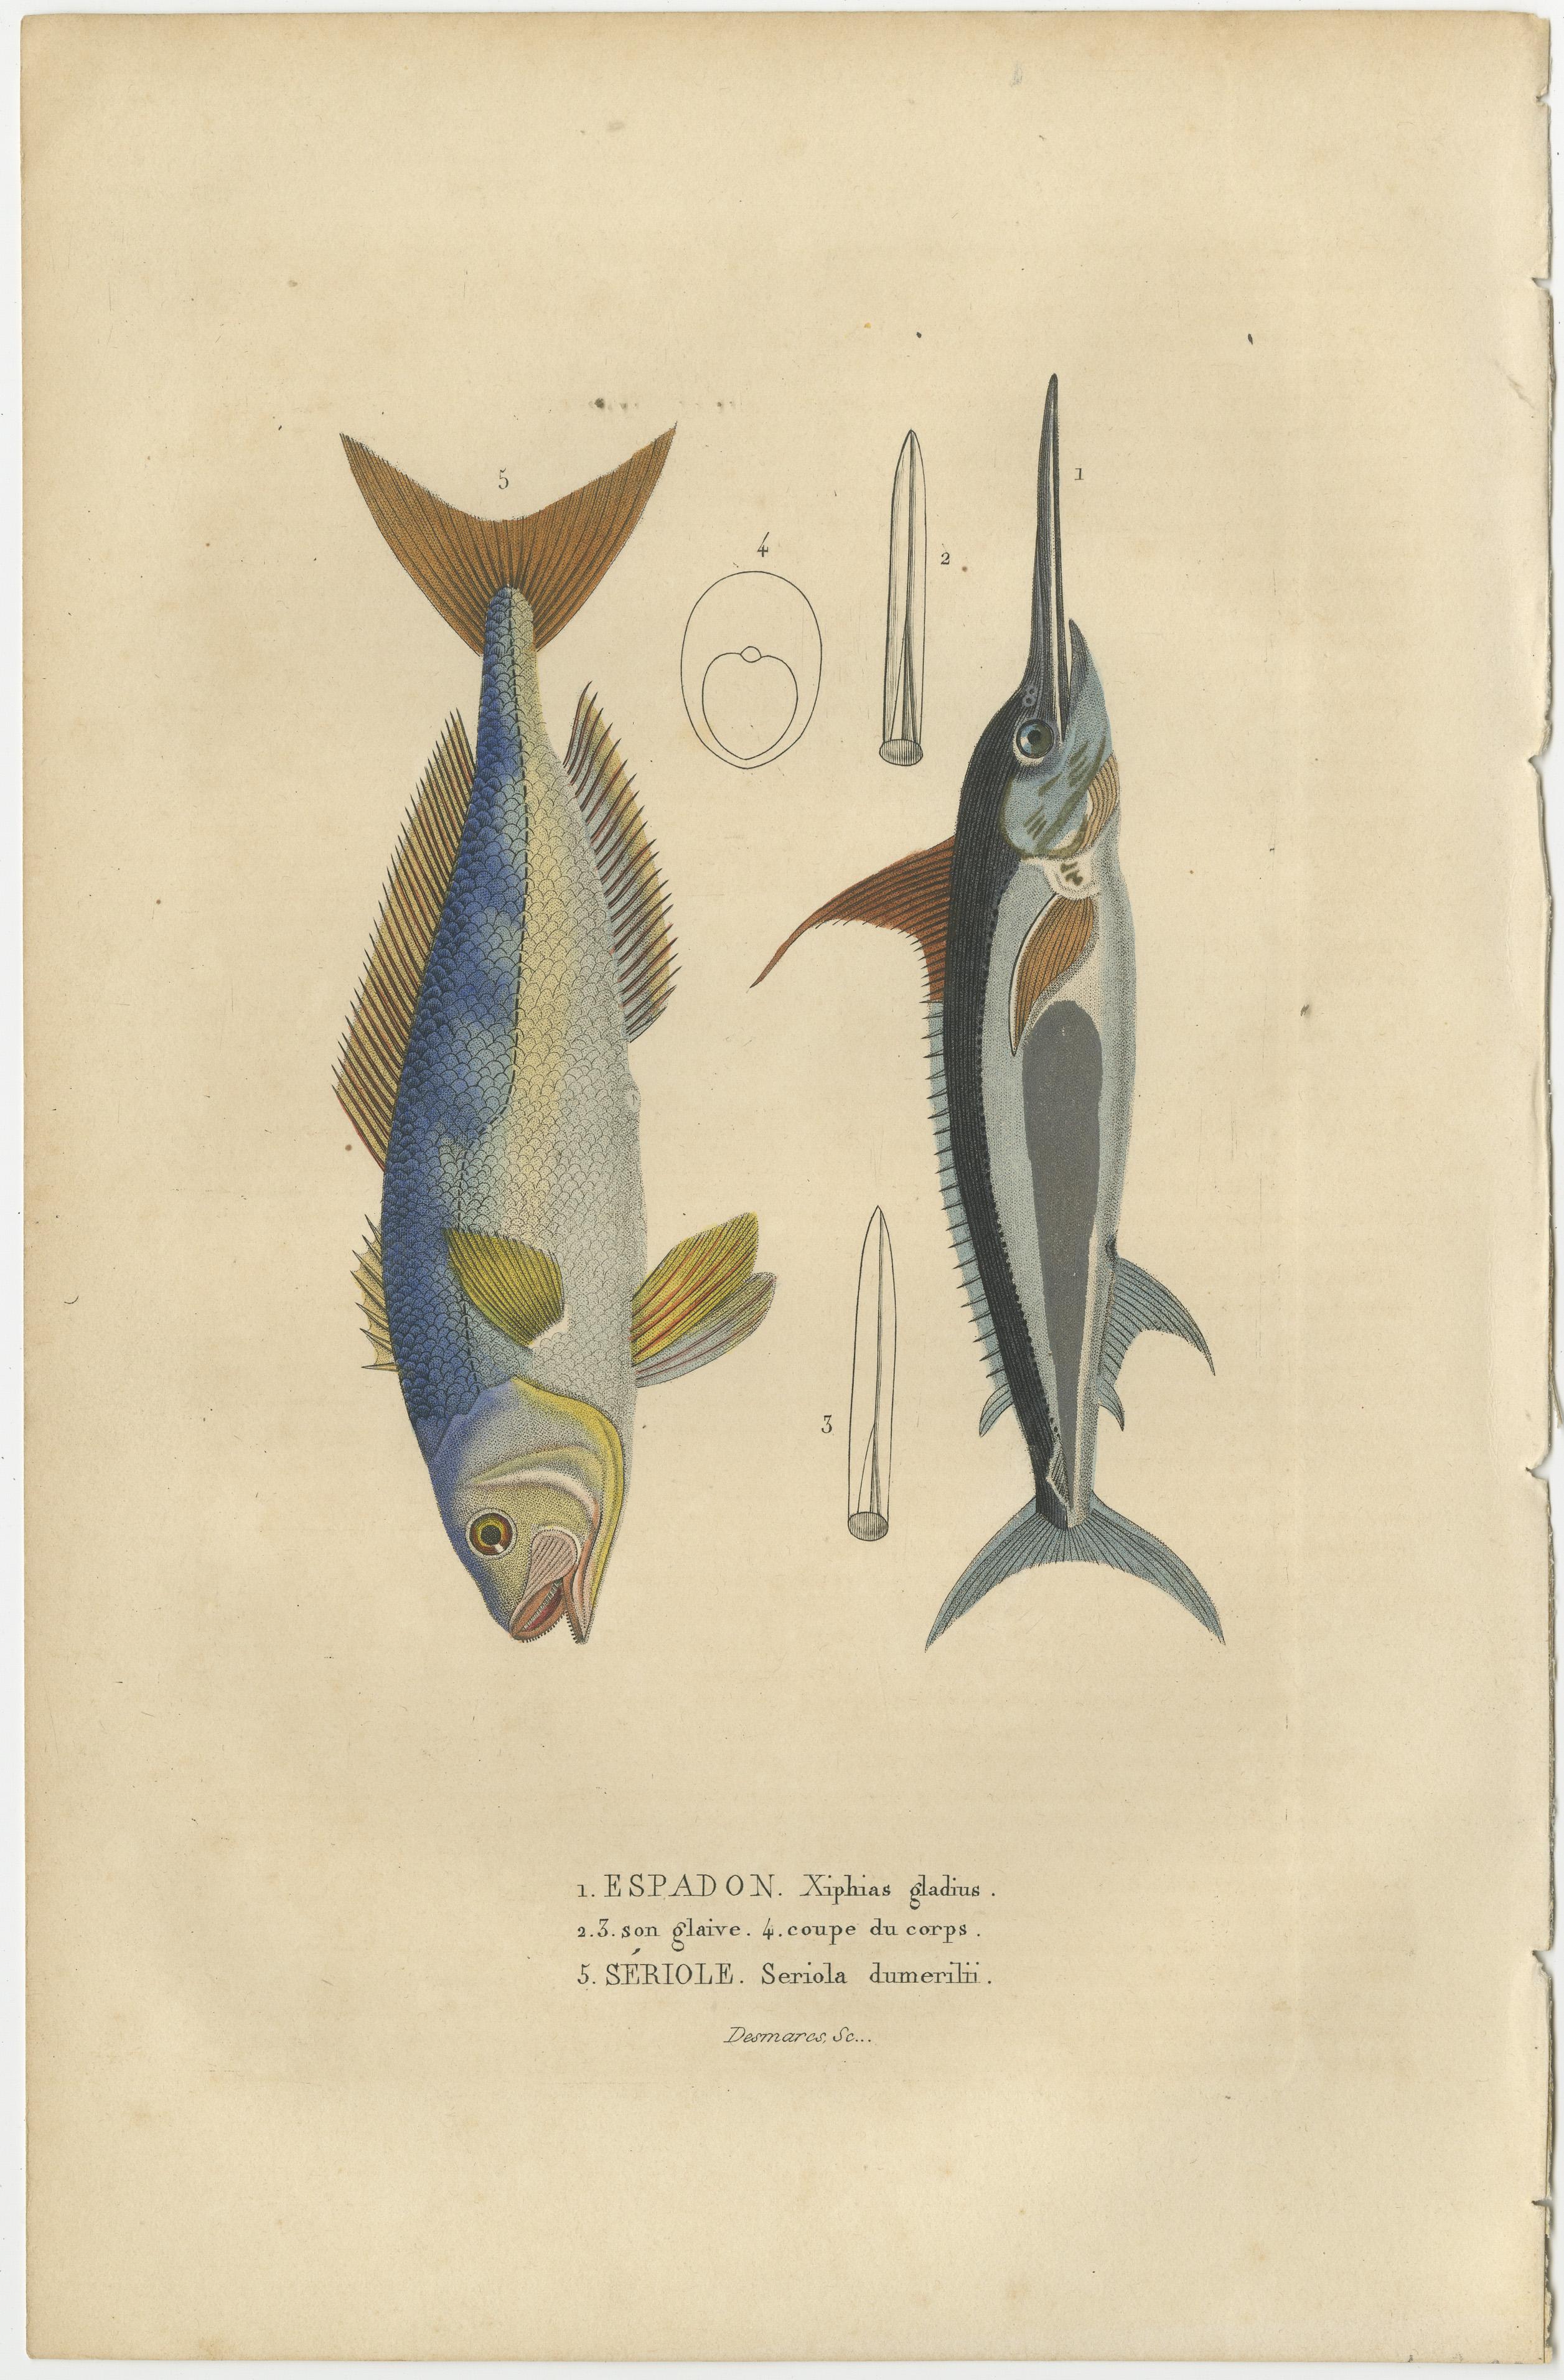 The collage you've provided includes illustrations of various marine animals, each labeled with a name that corresponds to specific species:

1. **Espadon**: This is commonly known as the swordfish. The illustration represents an Xiphias gladius,